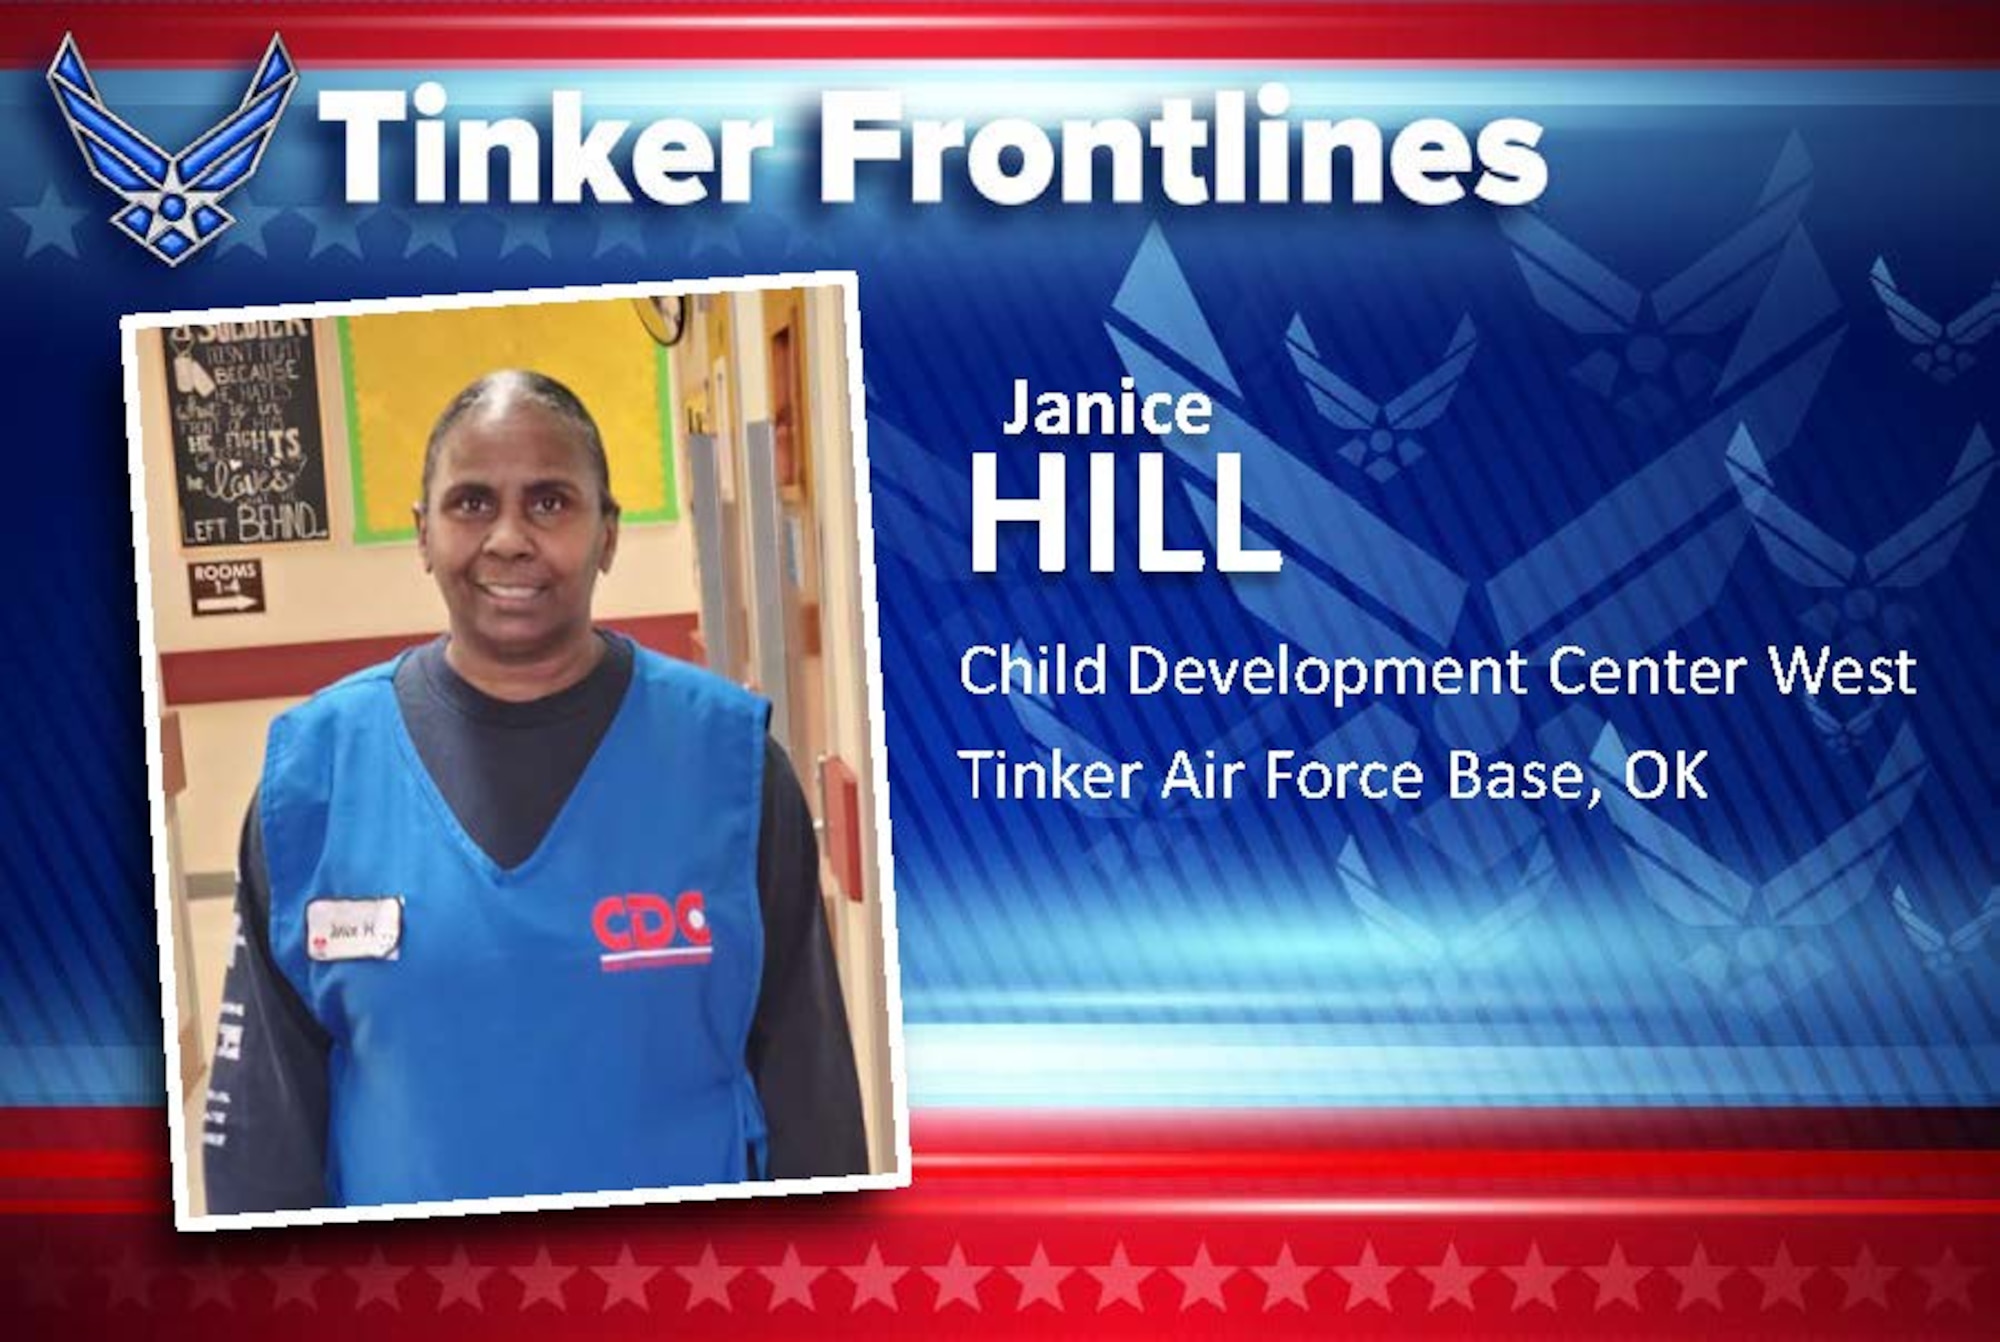 Janice Hill is a child and youth program assistant at the Child Development Center West and has worked at Tinker for 18 years.